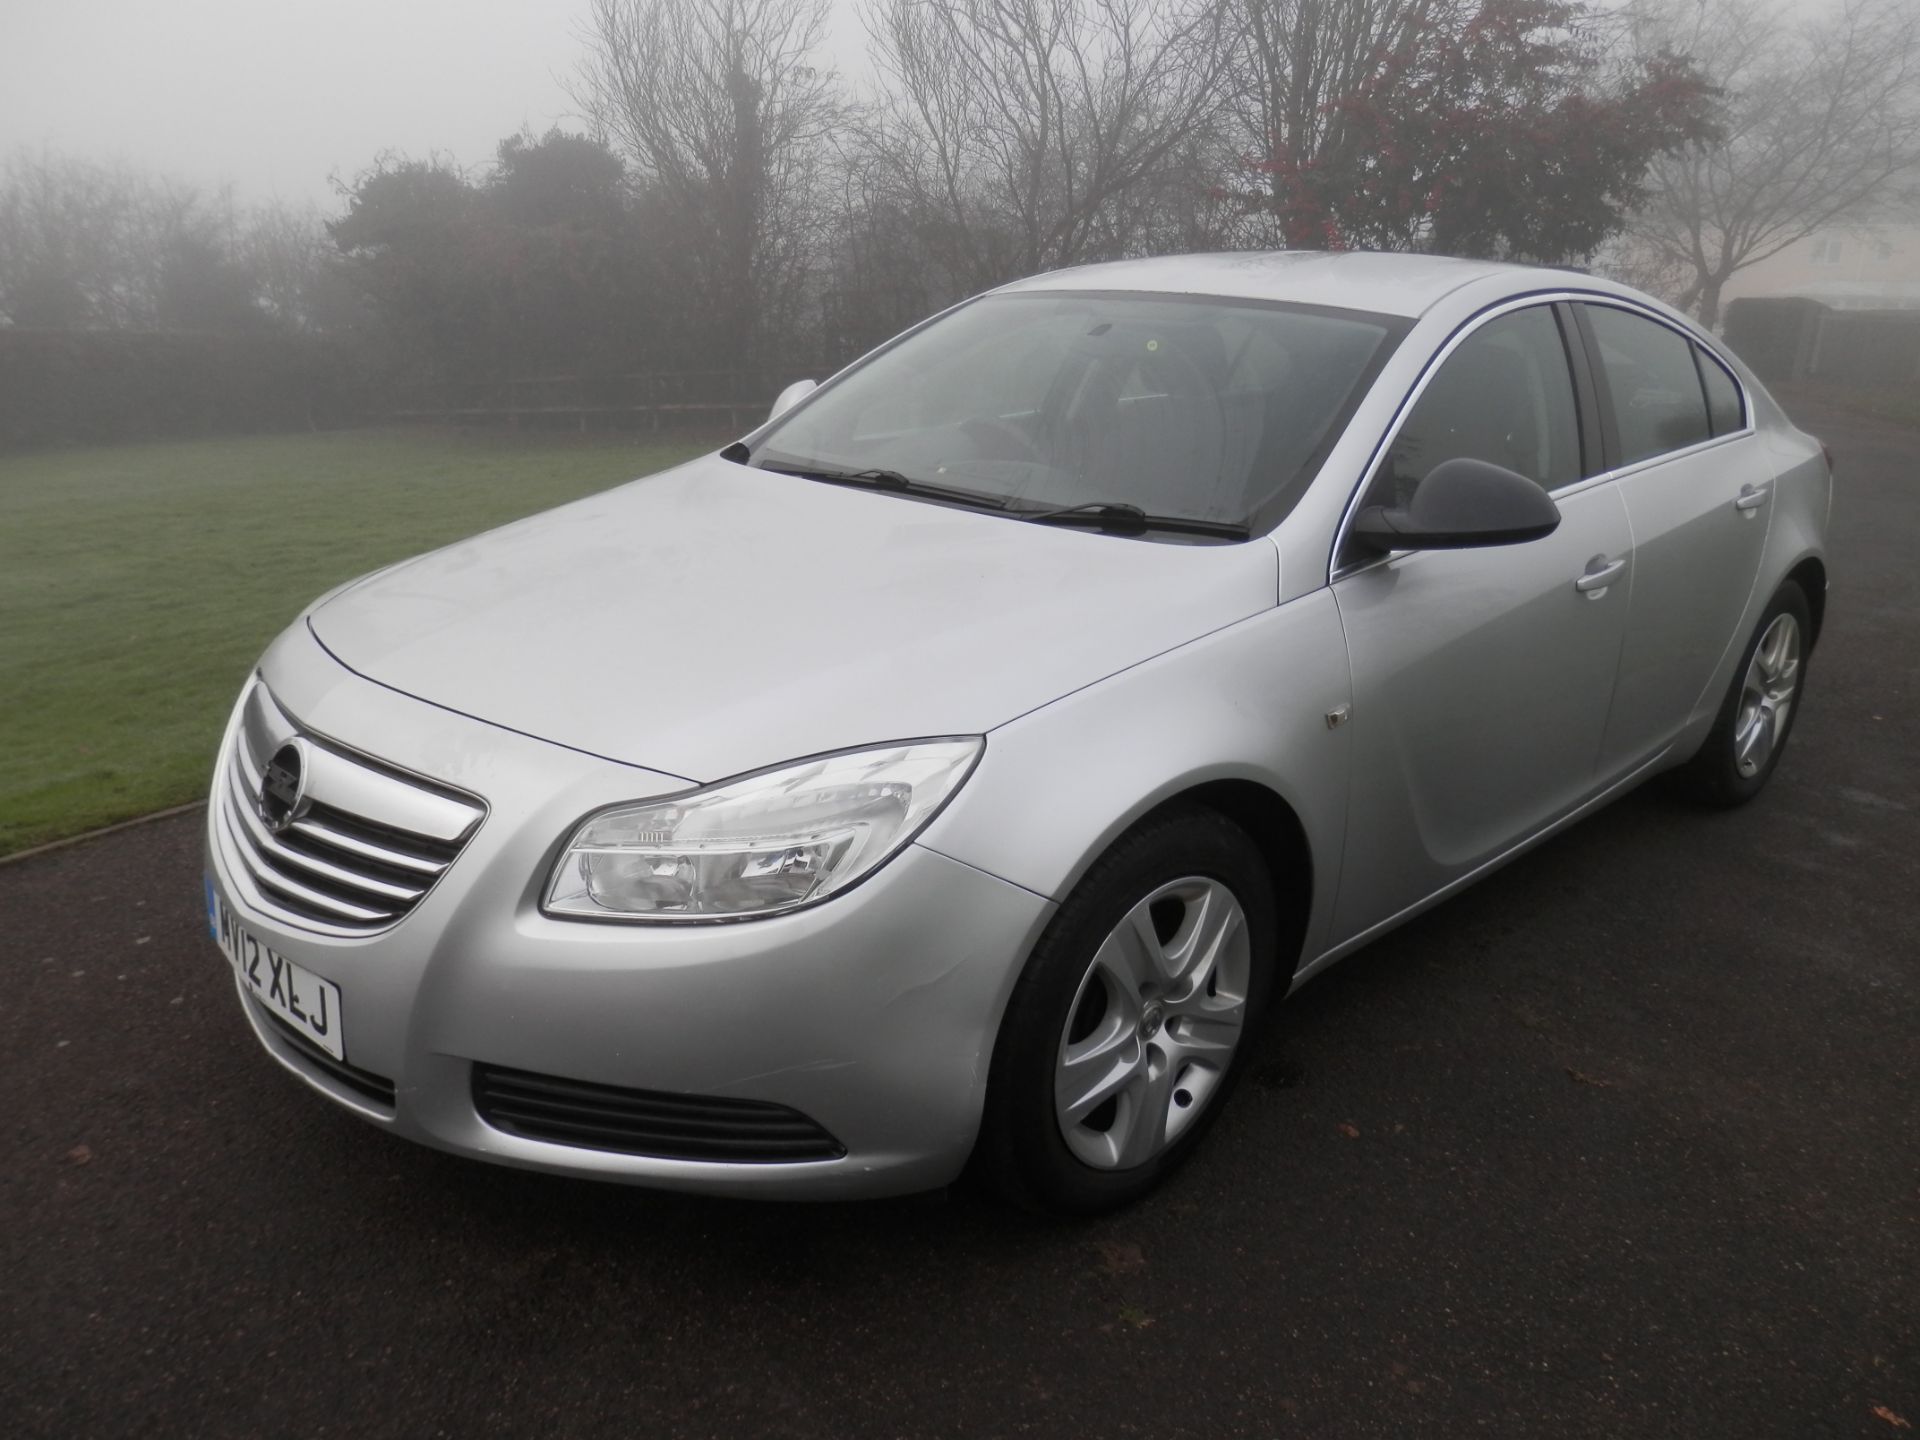 2012/12 VAUXHALL INSIGNIA EXCLUSIVE 2.0 TURBO DIESEL, MOT MARCH 2017, 6 SPEED MANUAL. - Image 7 of 16